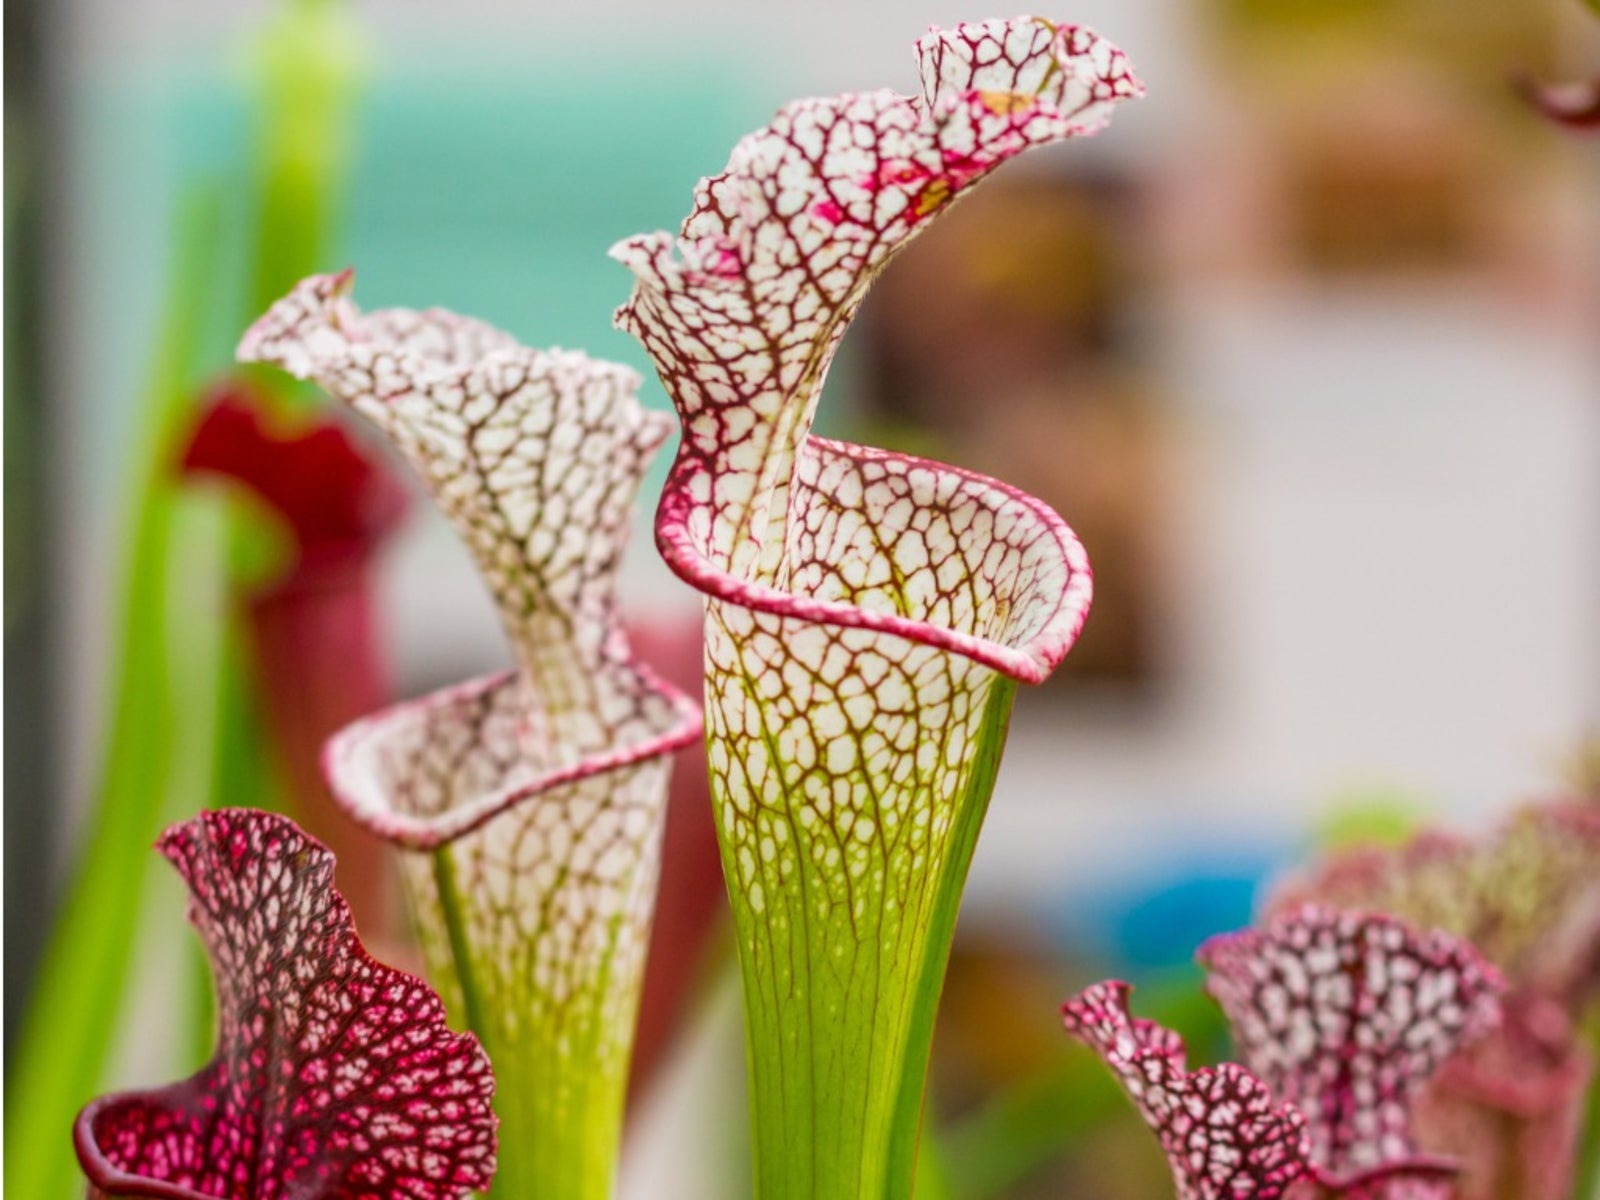 How to care for pitcher carnivorous plants